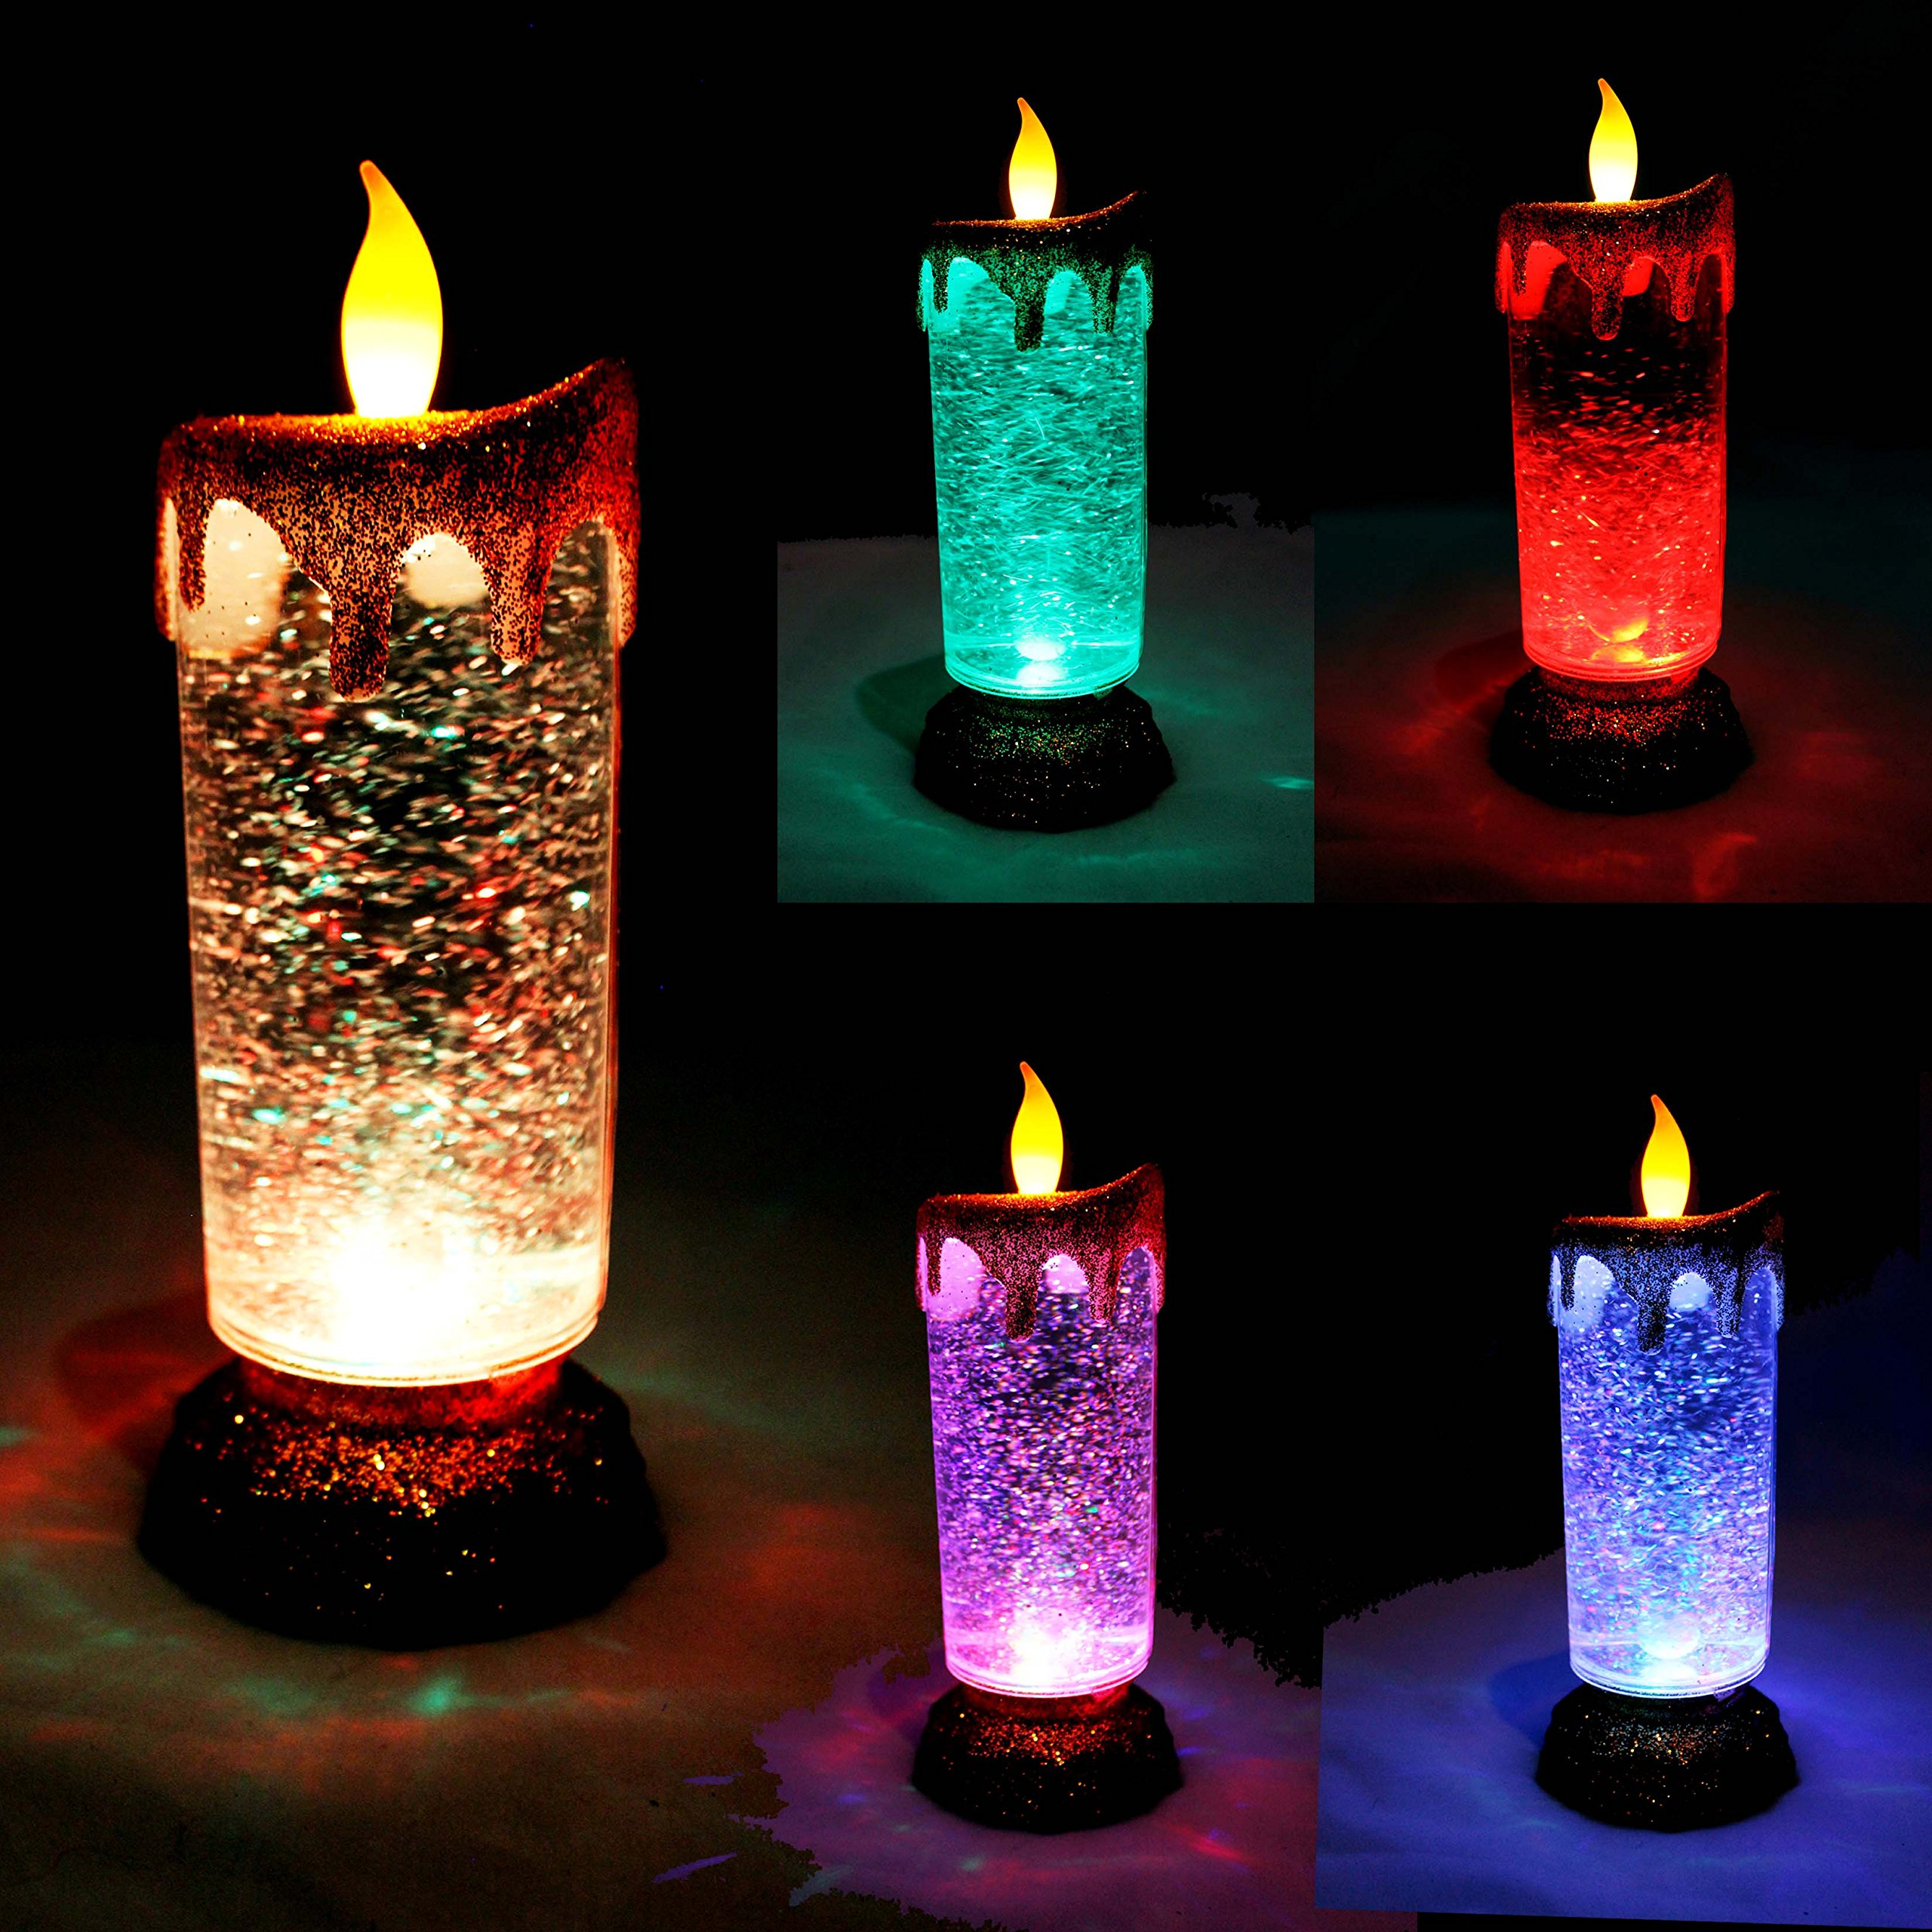 What kind of liquid is used in swirling glitter candles?